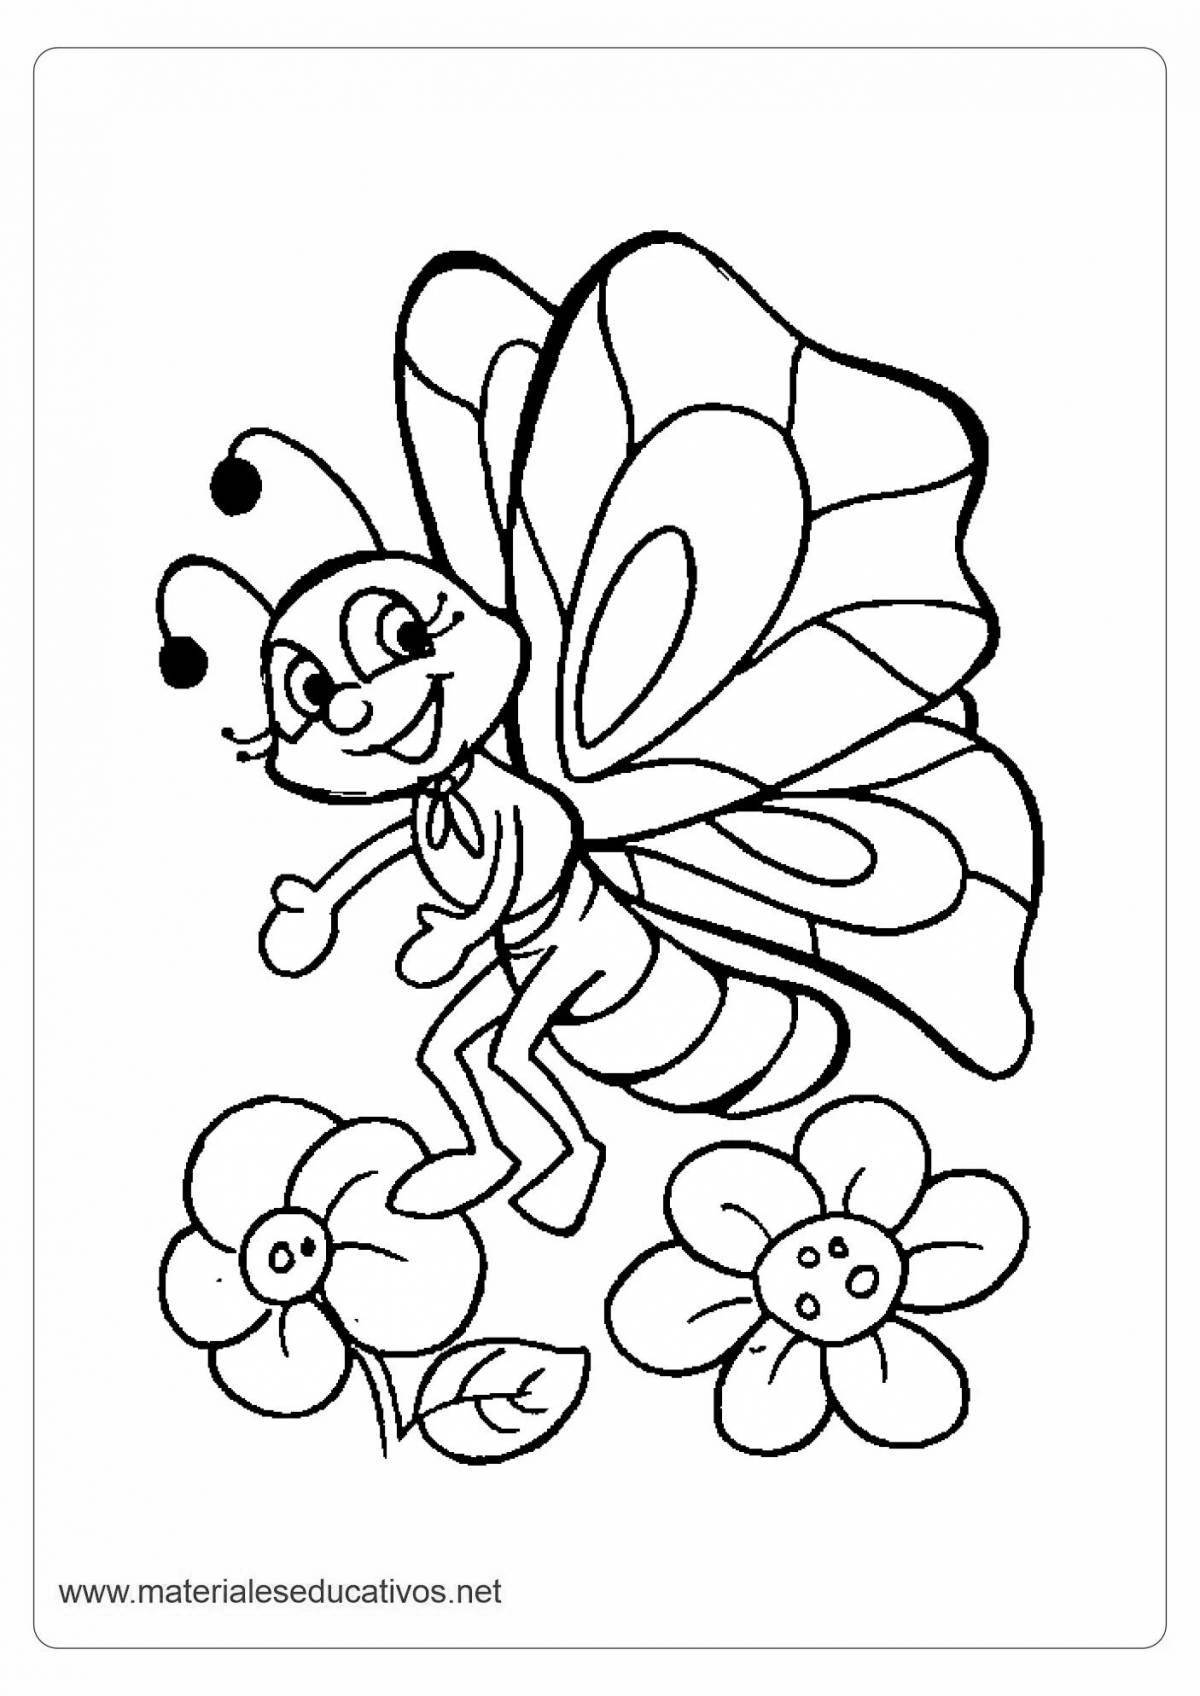 Shiny butterfly with flower coloring book